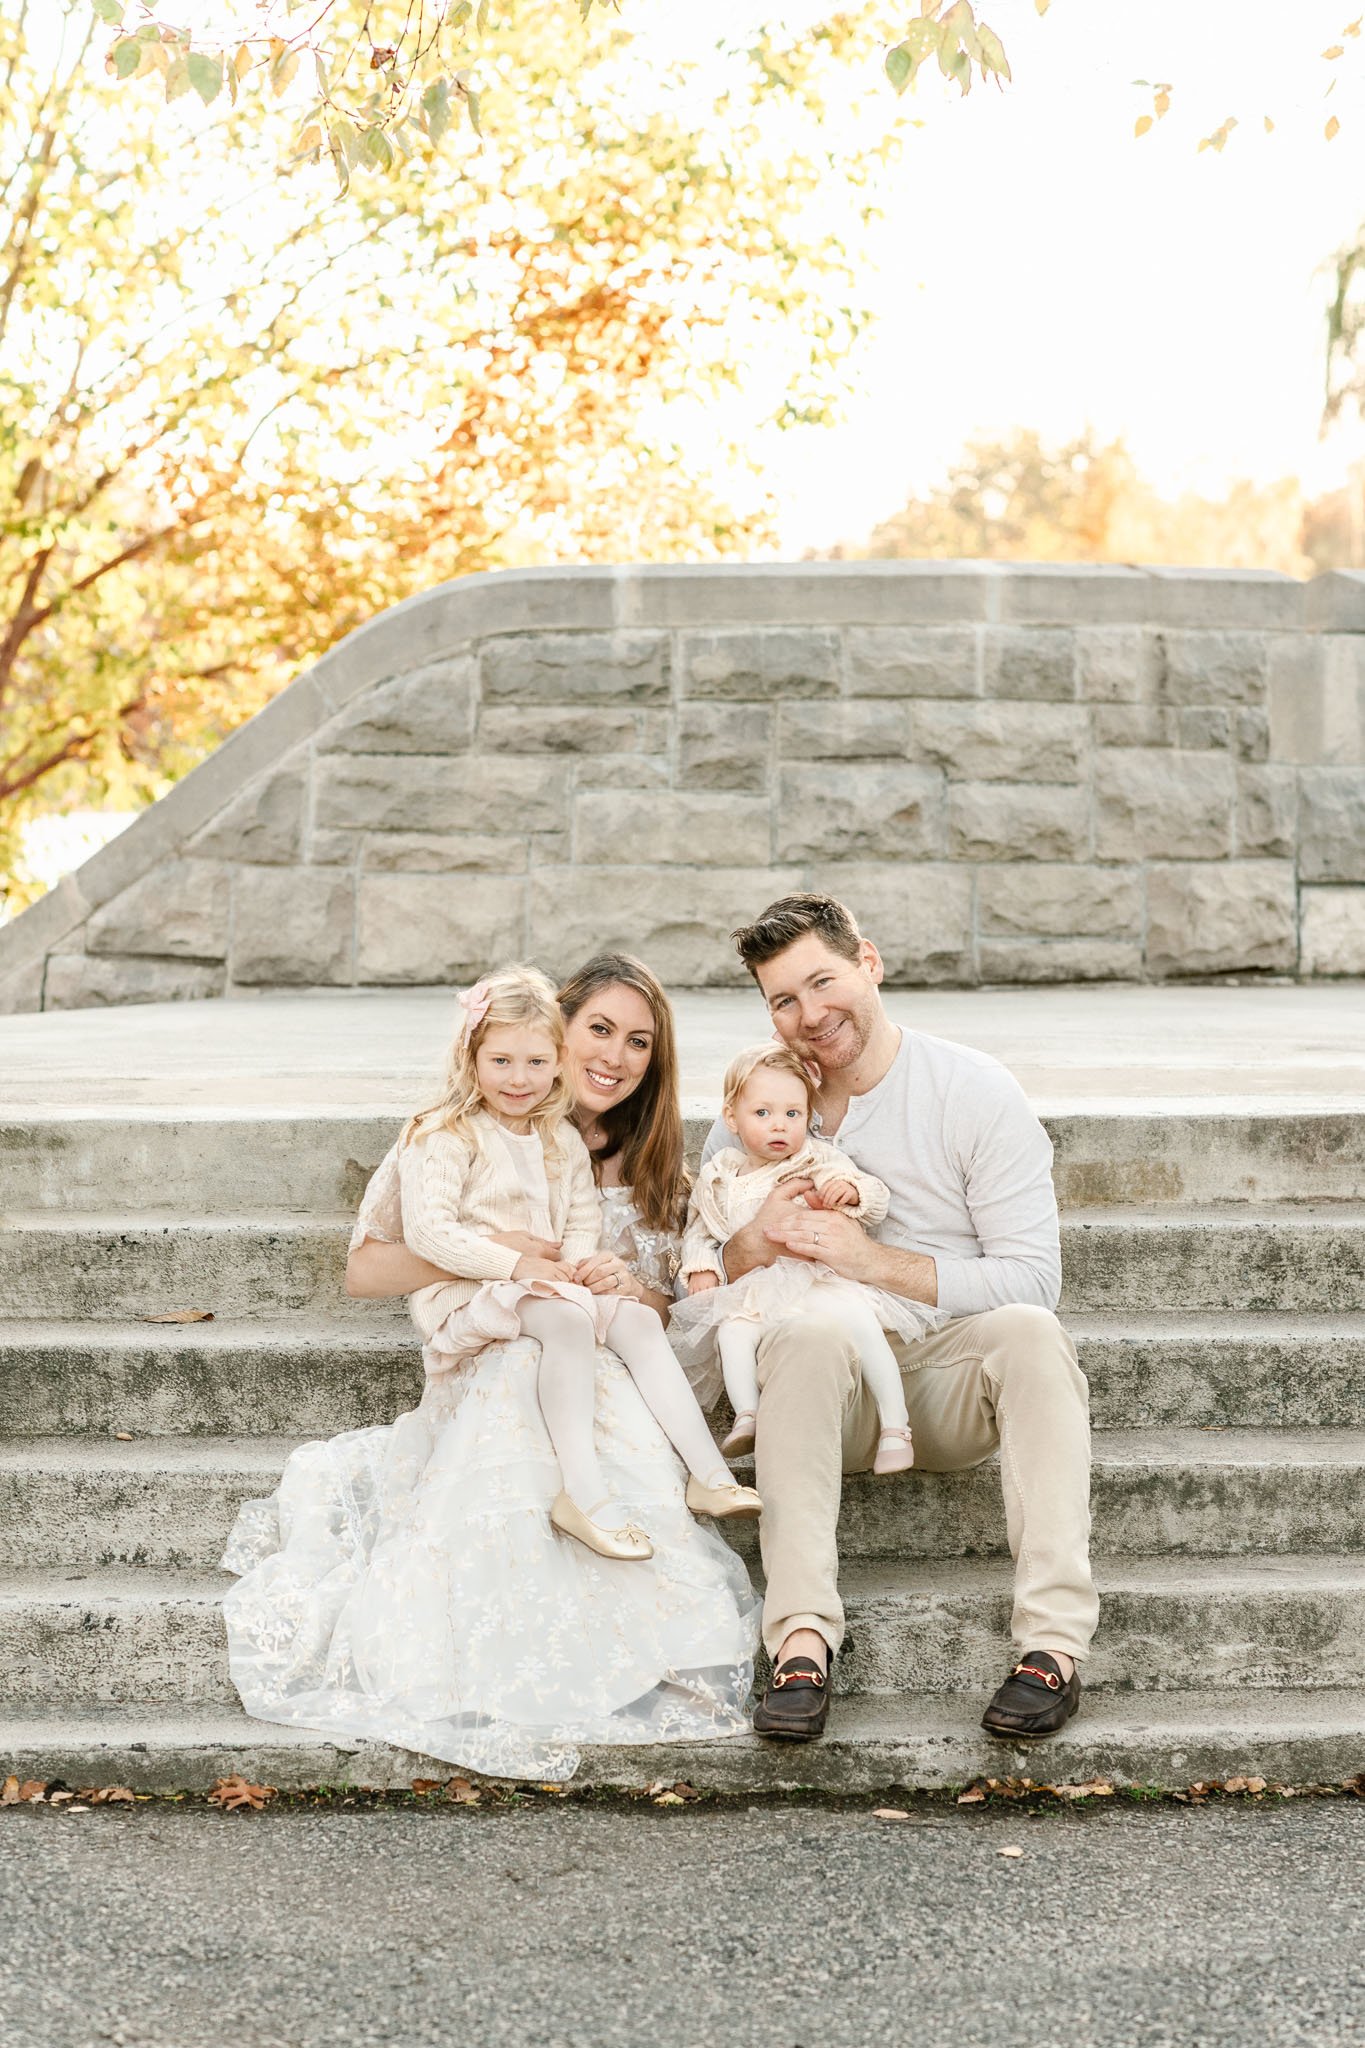  Reasons why you should do fall family portraits in the NY/NJ area with Nicole Hawkins Photography. family with two little girls outdoor family portraits #NicoleHawkinsPhotography #NicoleHawkinsFamilies #FallFamilyPhotos #FallPortraits #NJFamilyPhoto